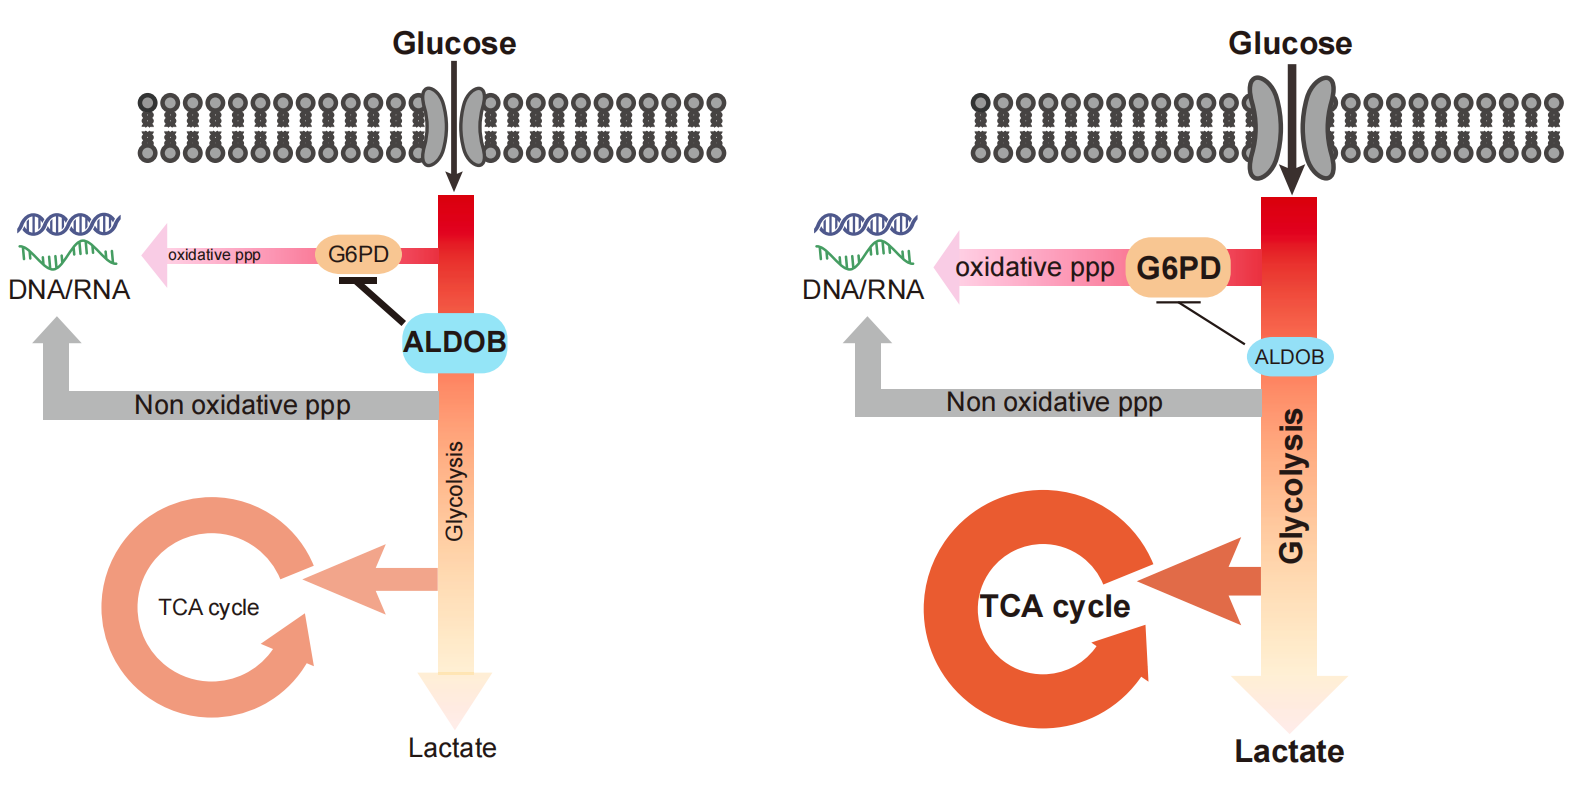 Summary_scheme_highlighting_the_roles_of_the_GLUT1_ALDOB_G6PD_axis_in_glucose_reprogramming